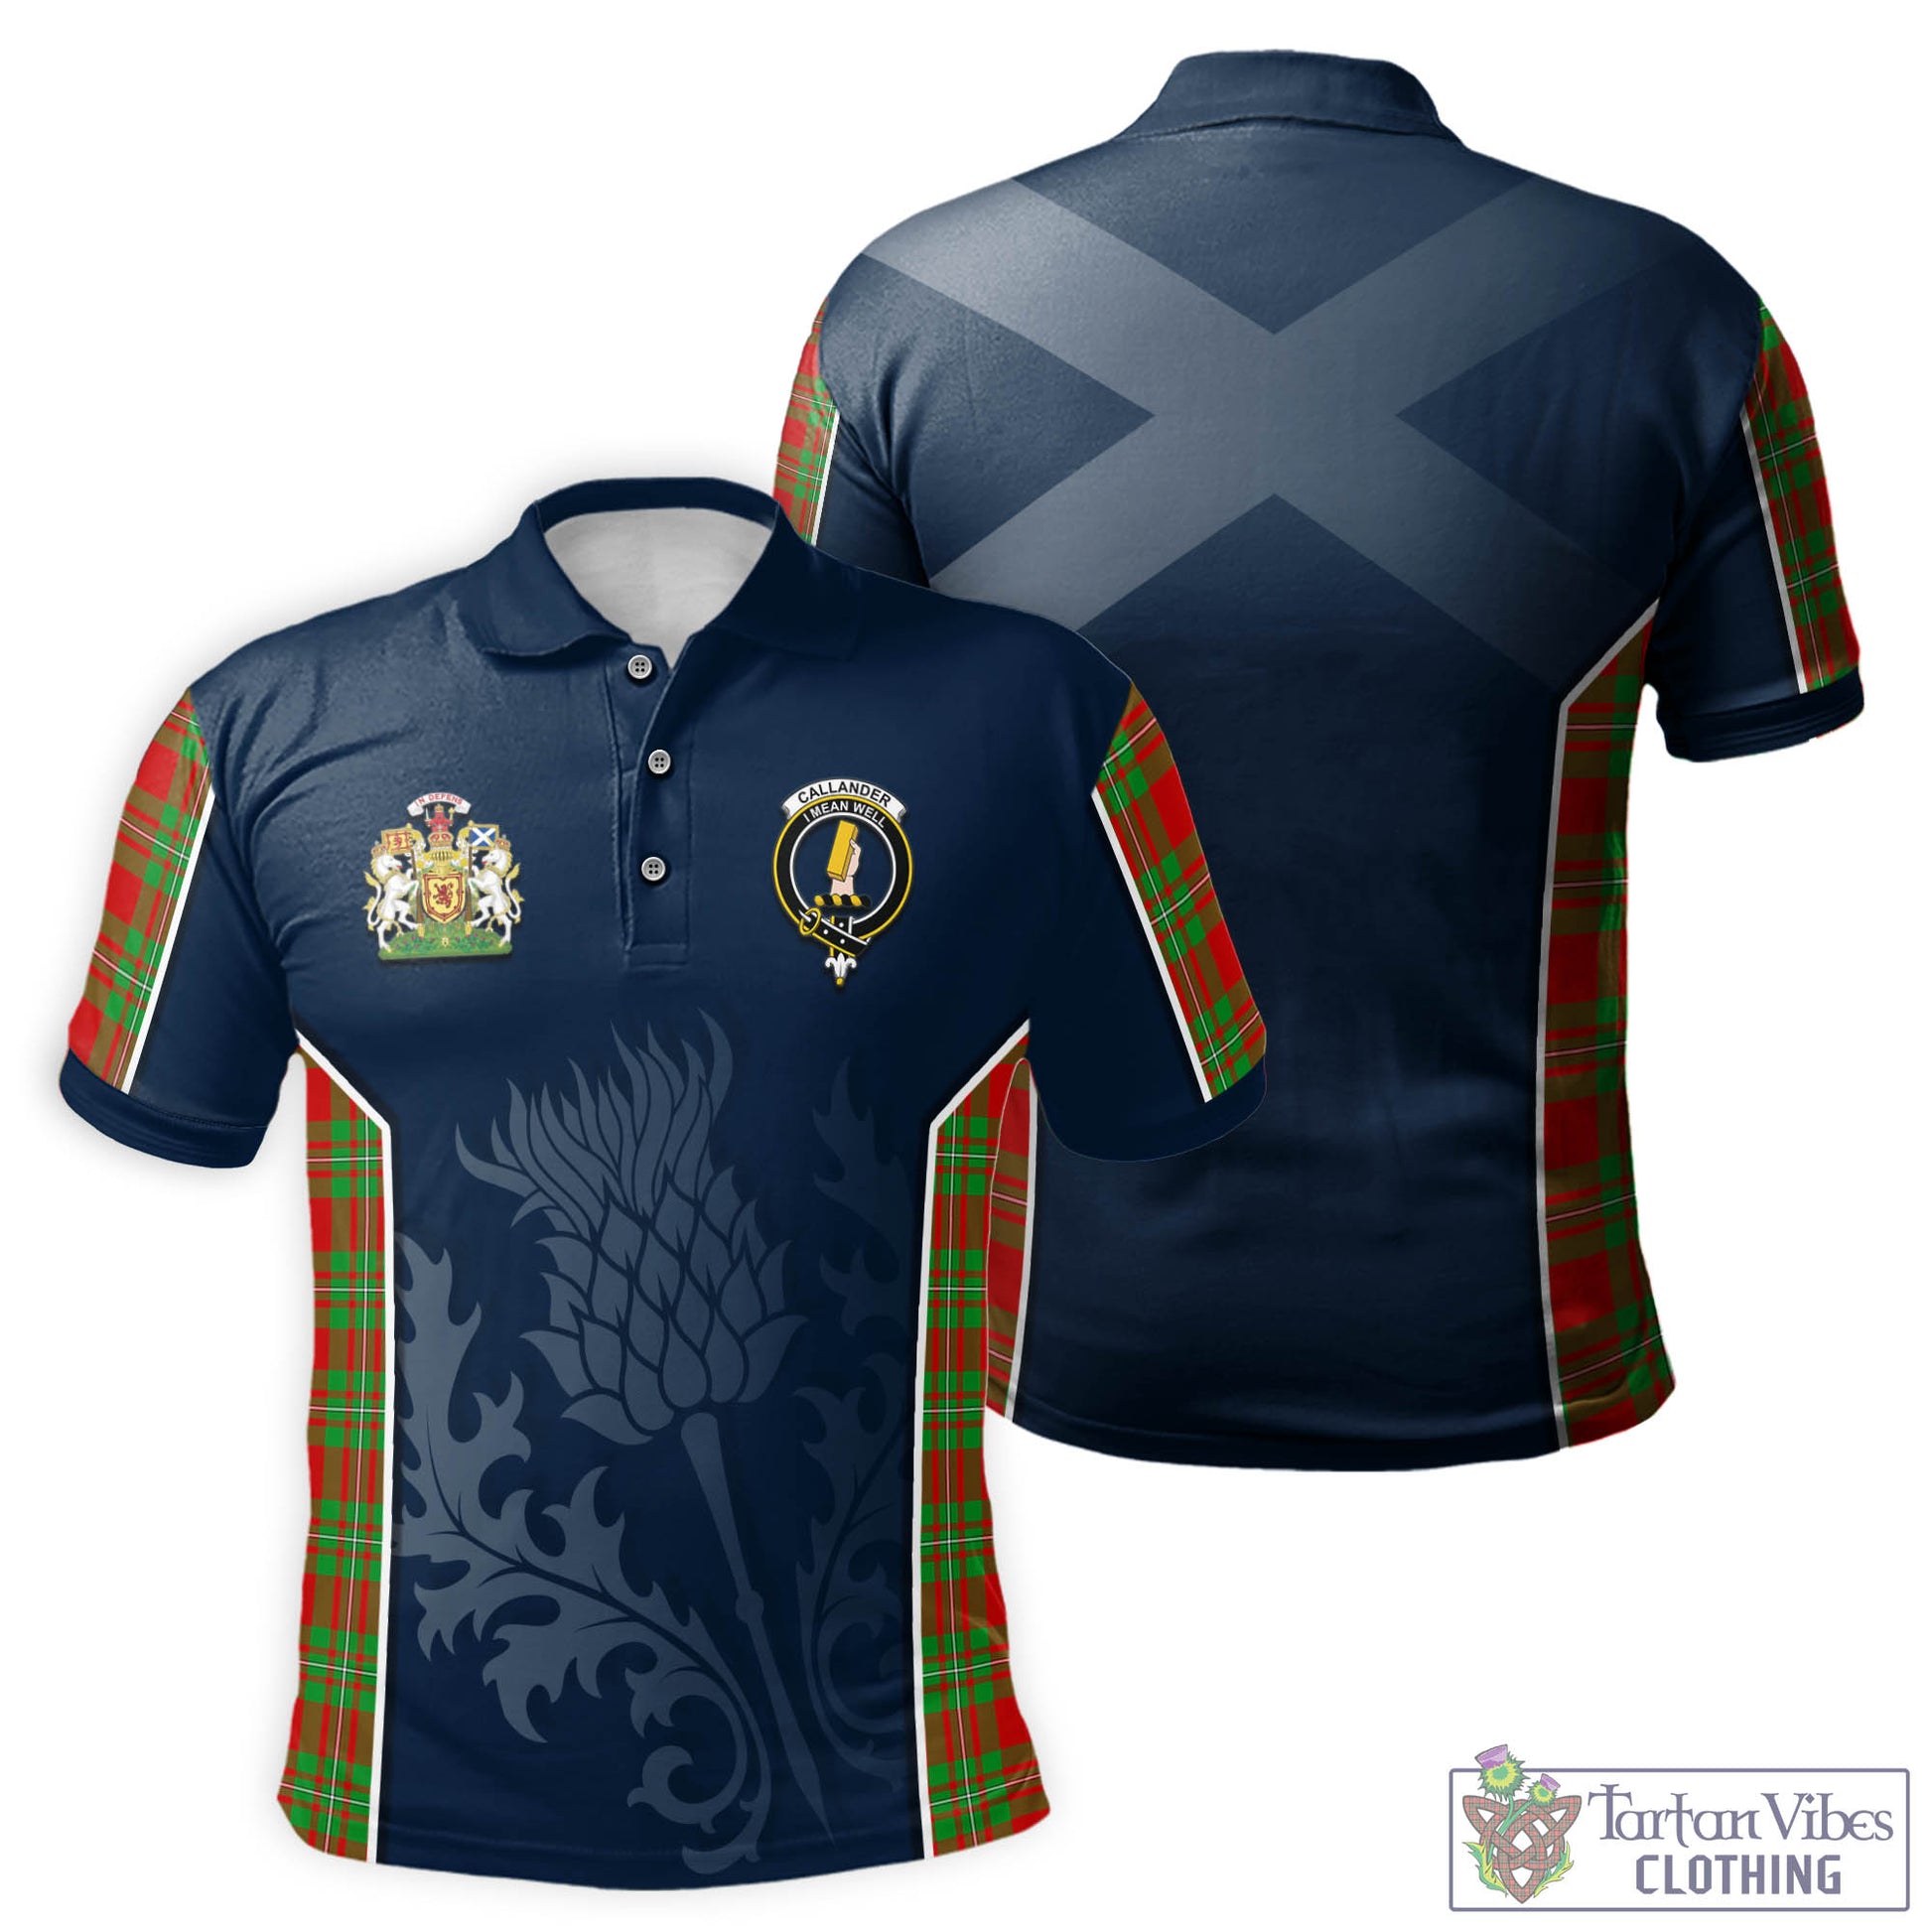 Tartan Vibes Clothing Callander Modern Tartan Men's Polo Shirt with Family Crest and Scottish Thistle Vibes Sport Style